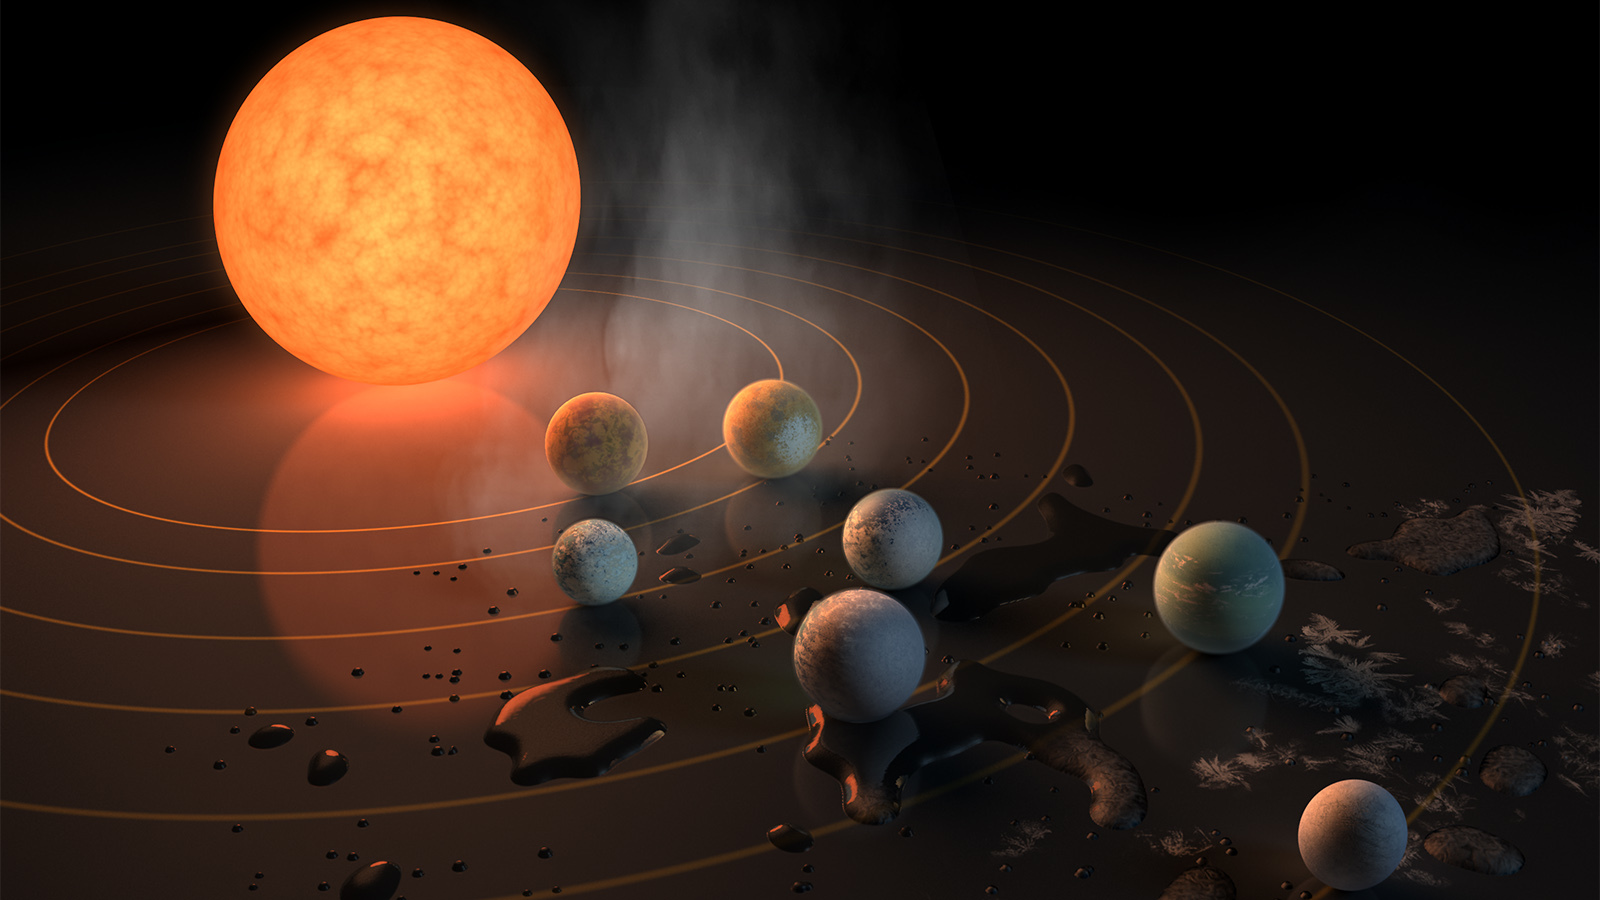 Seven planets rest on a surface around their star TRAPPIST-1.